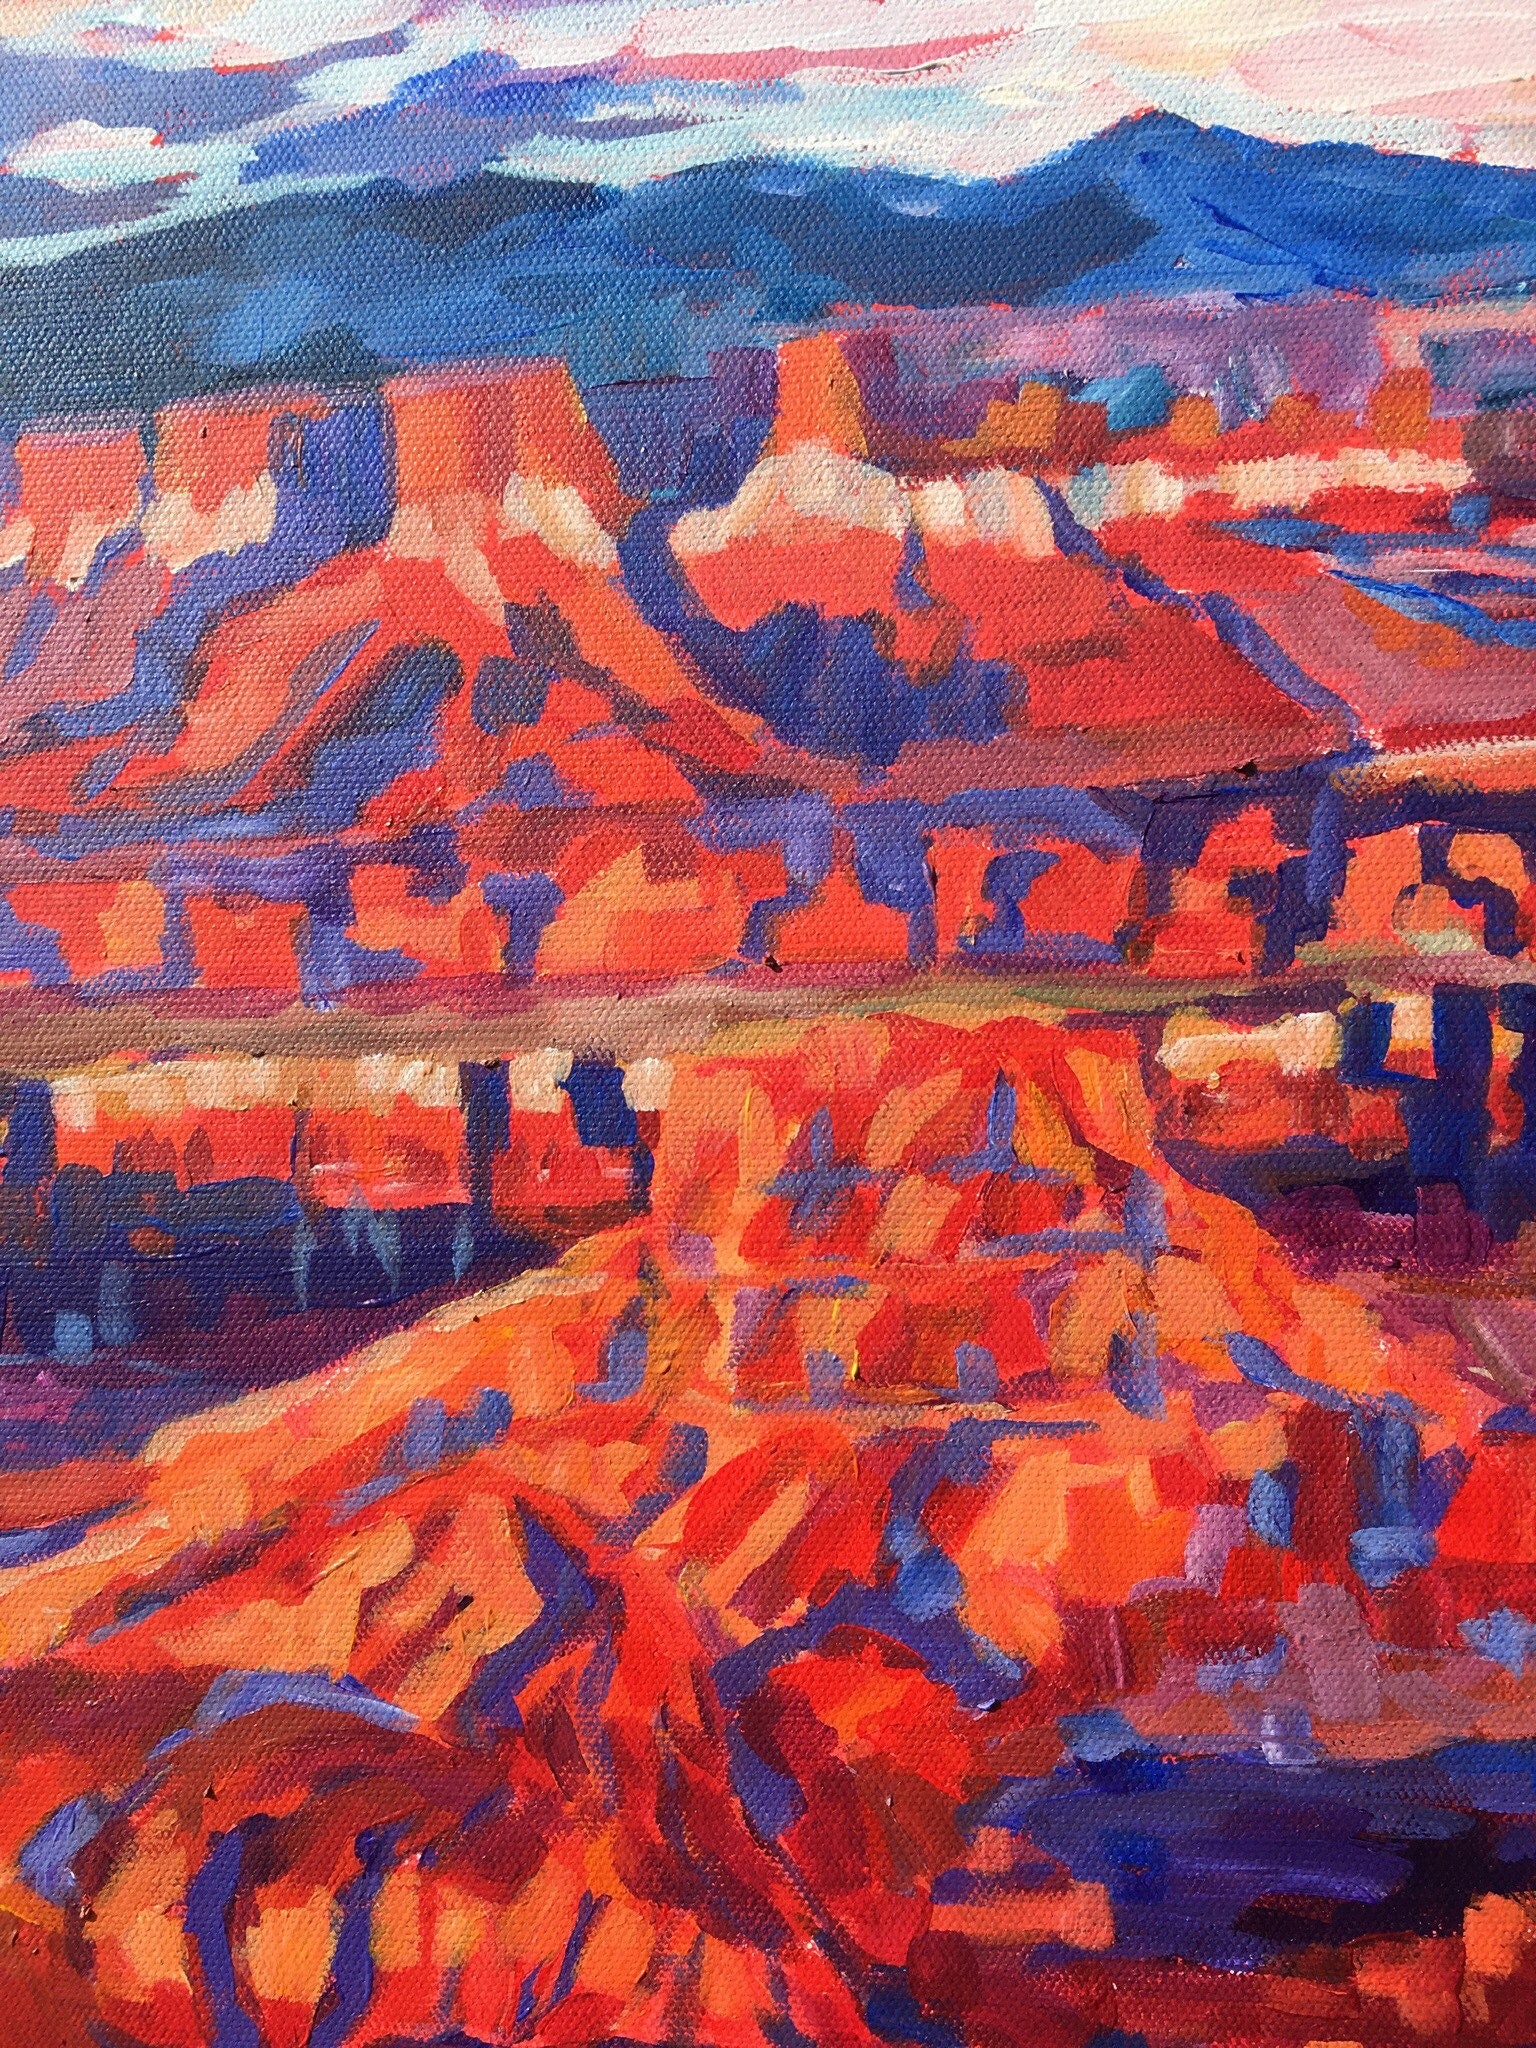 detail of painting, rocky cliffs and mountains